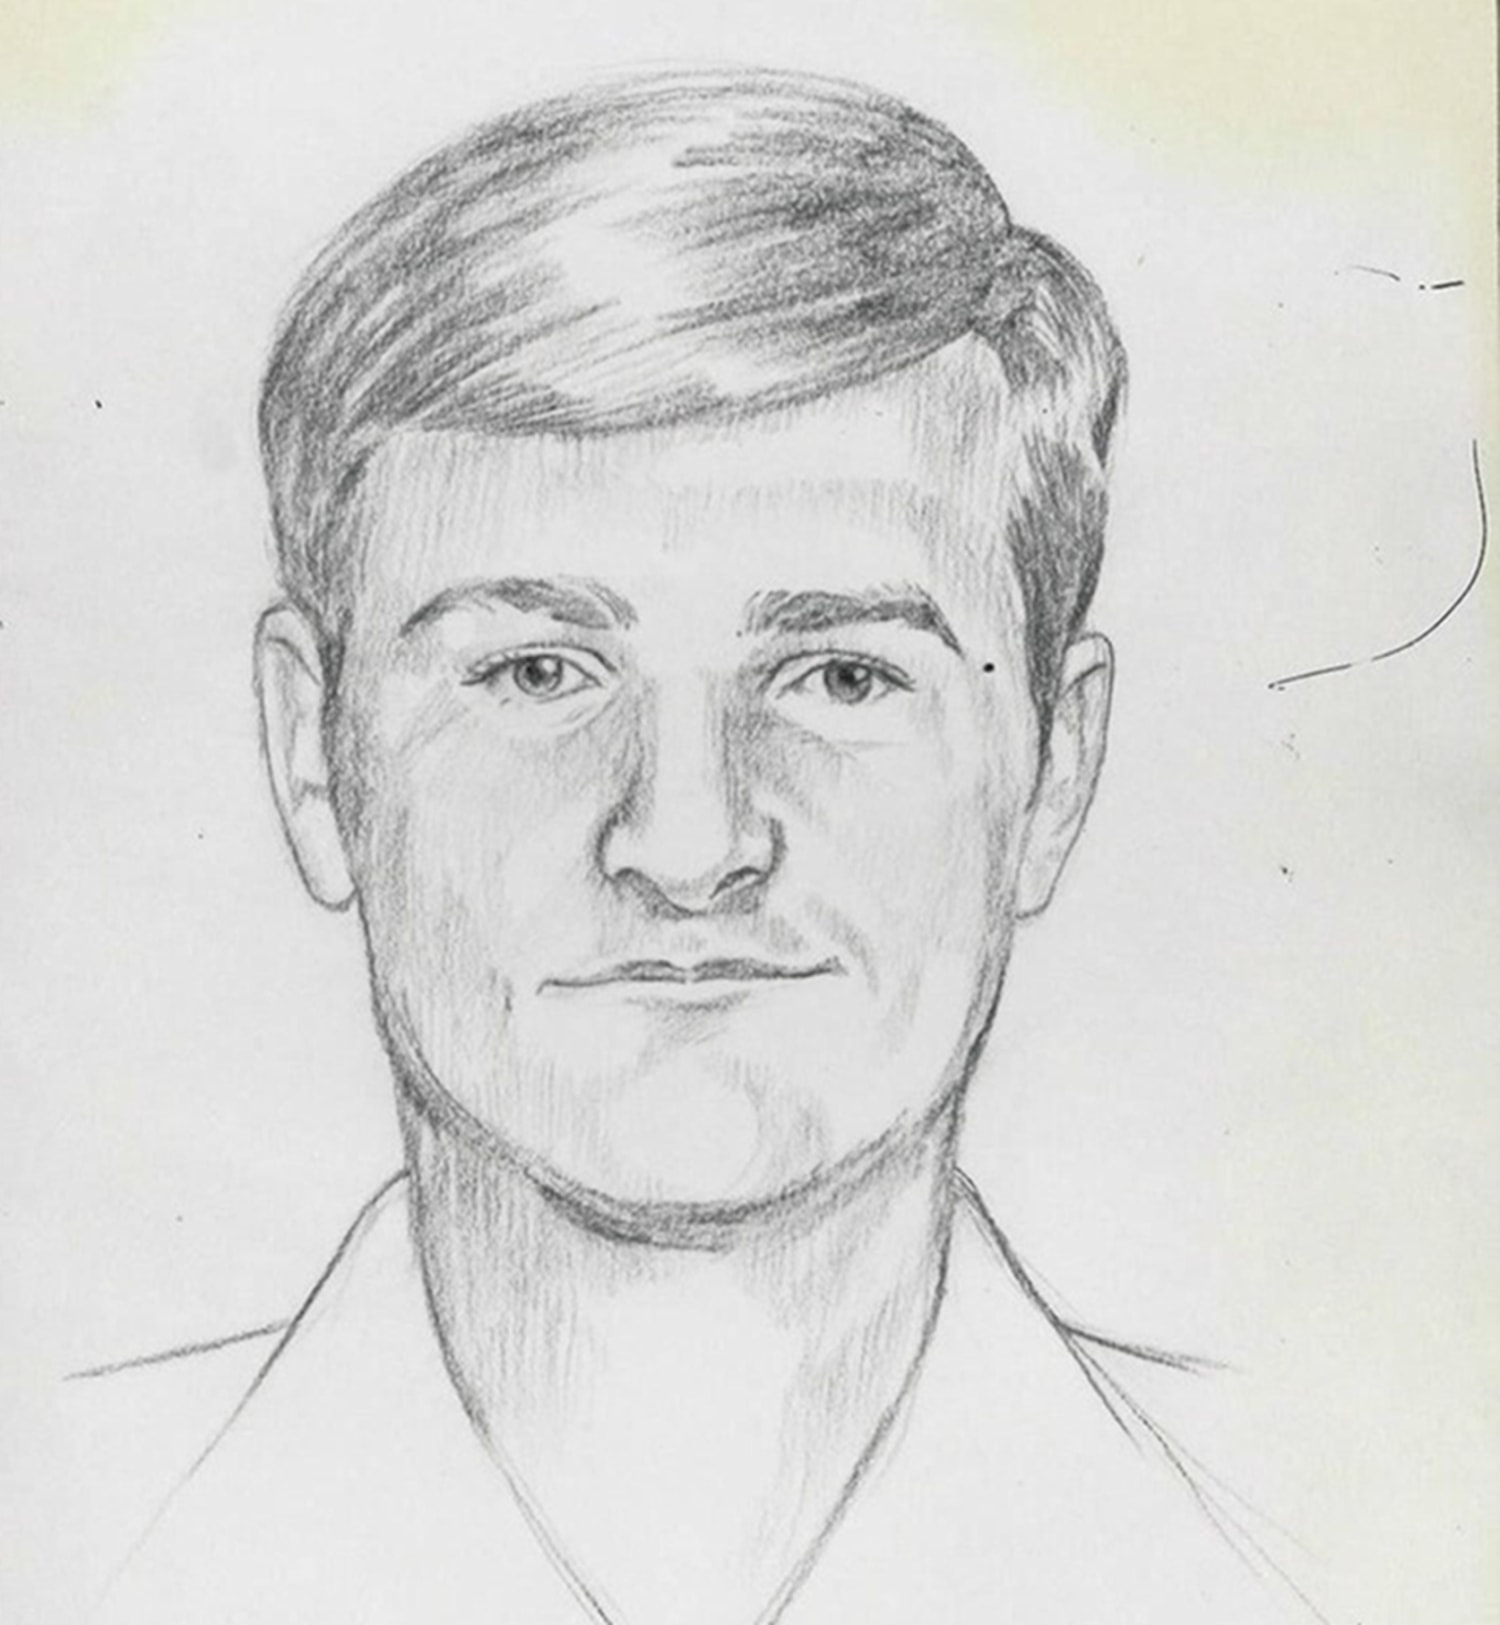 Search for 'Golden State Killer' Leads to Arrest of Ex-Cop - The New York  Times